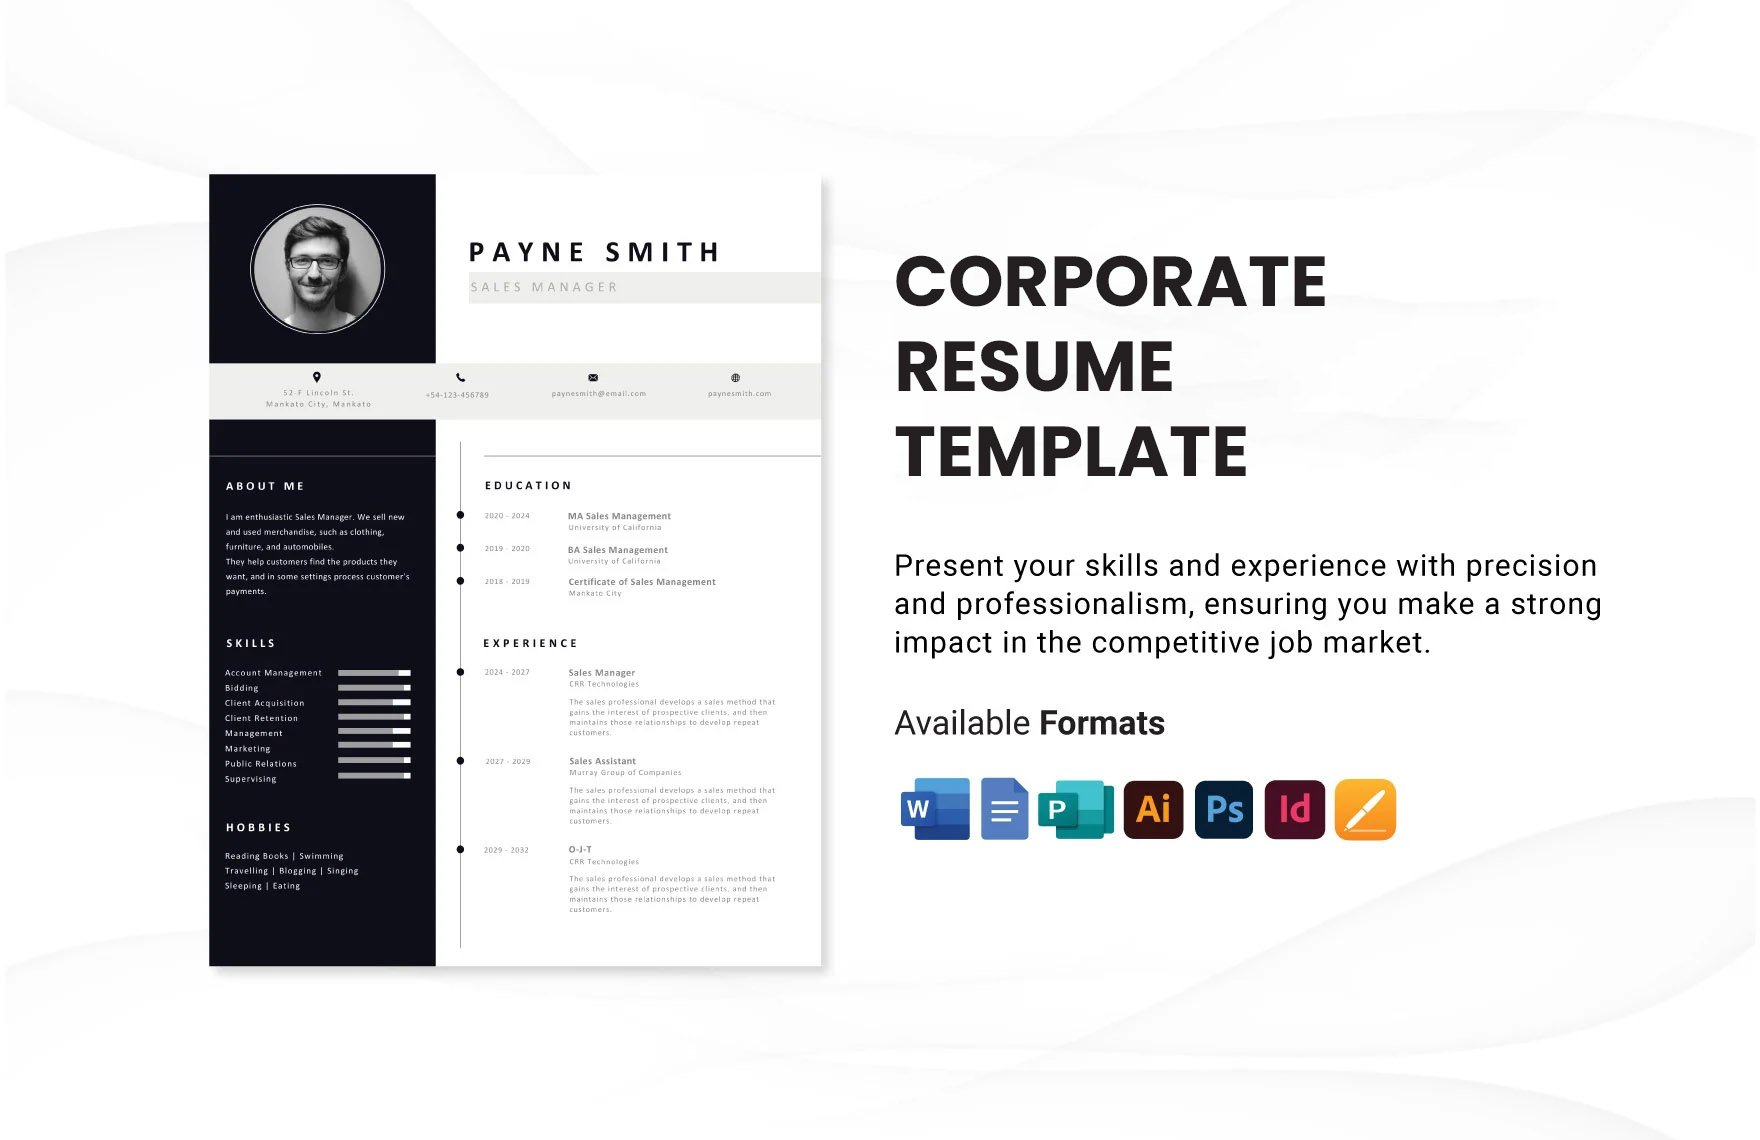 Corporate Resume Template in Word, Google Docs, PDF, Illustrator, PSD, Apple Pages, Publisher, InDesign